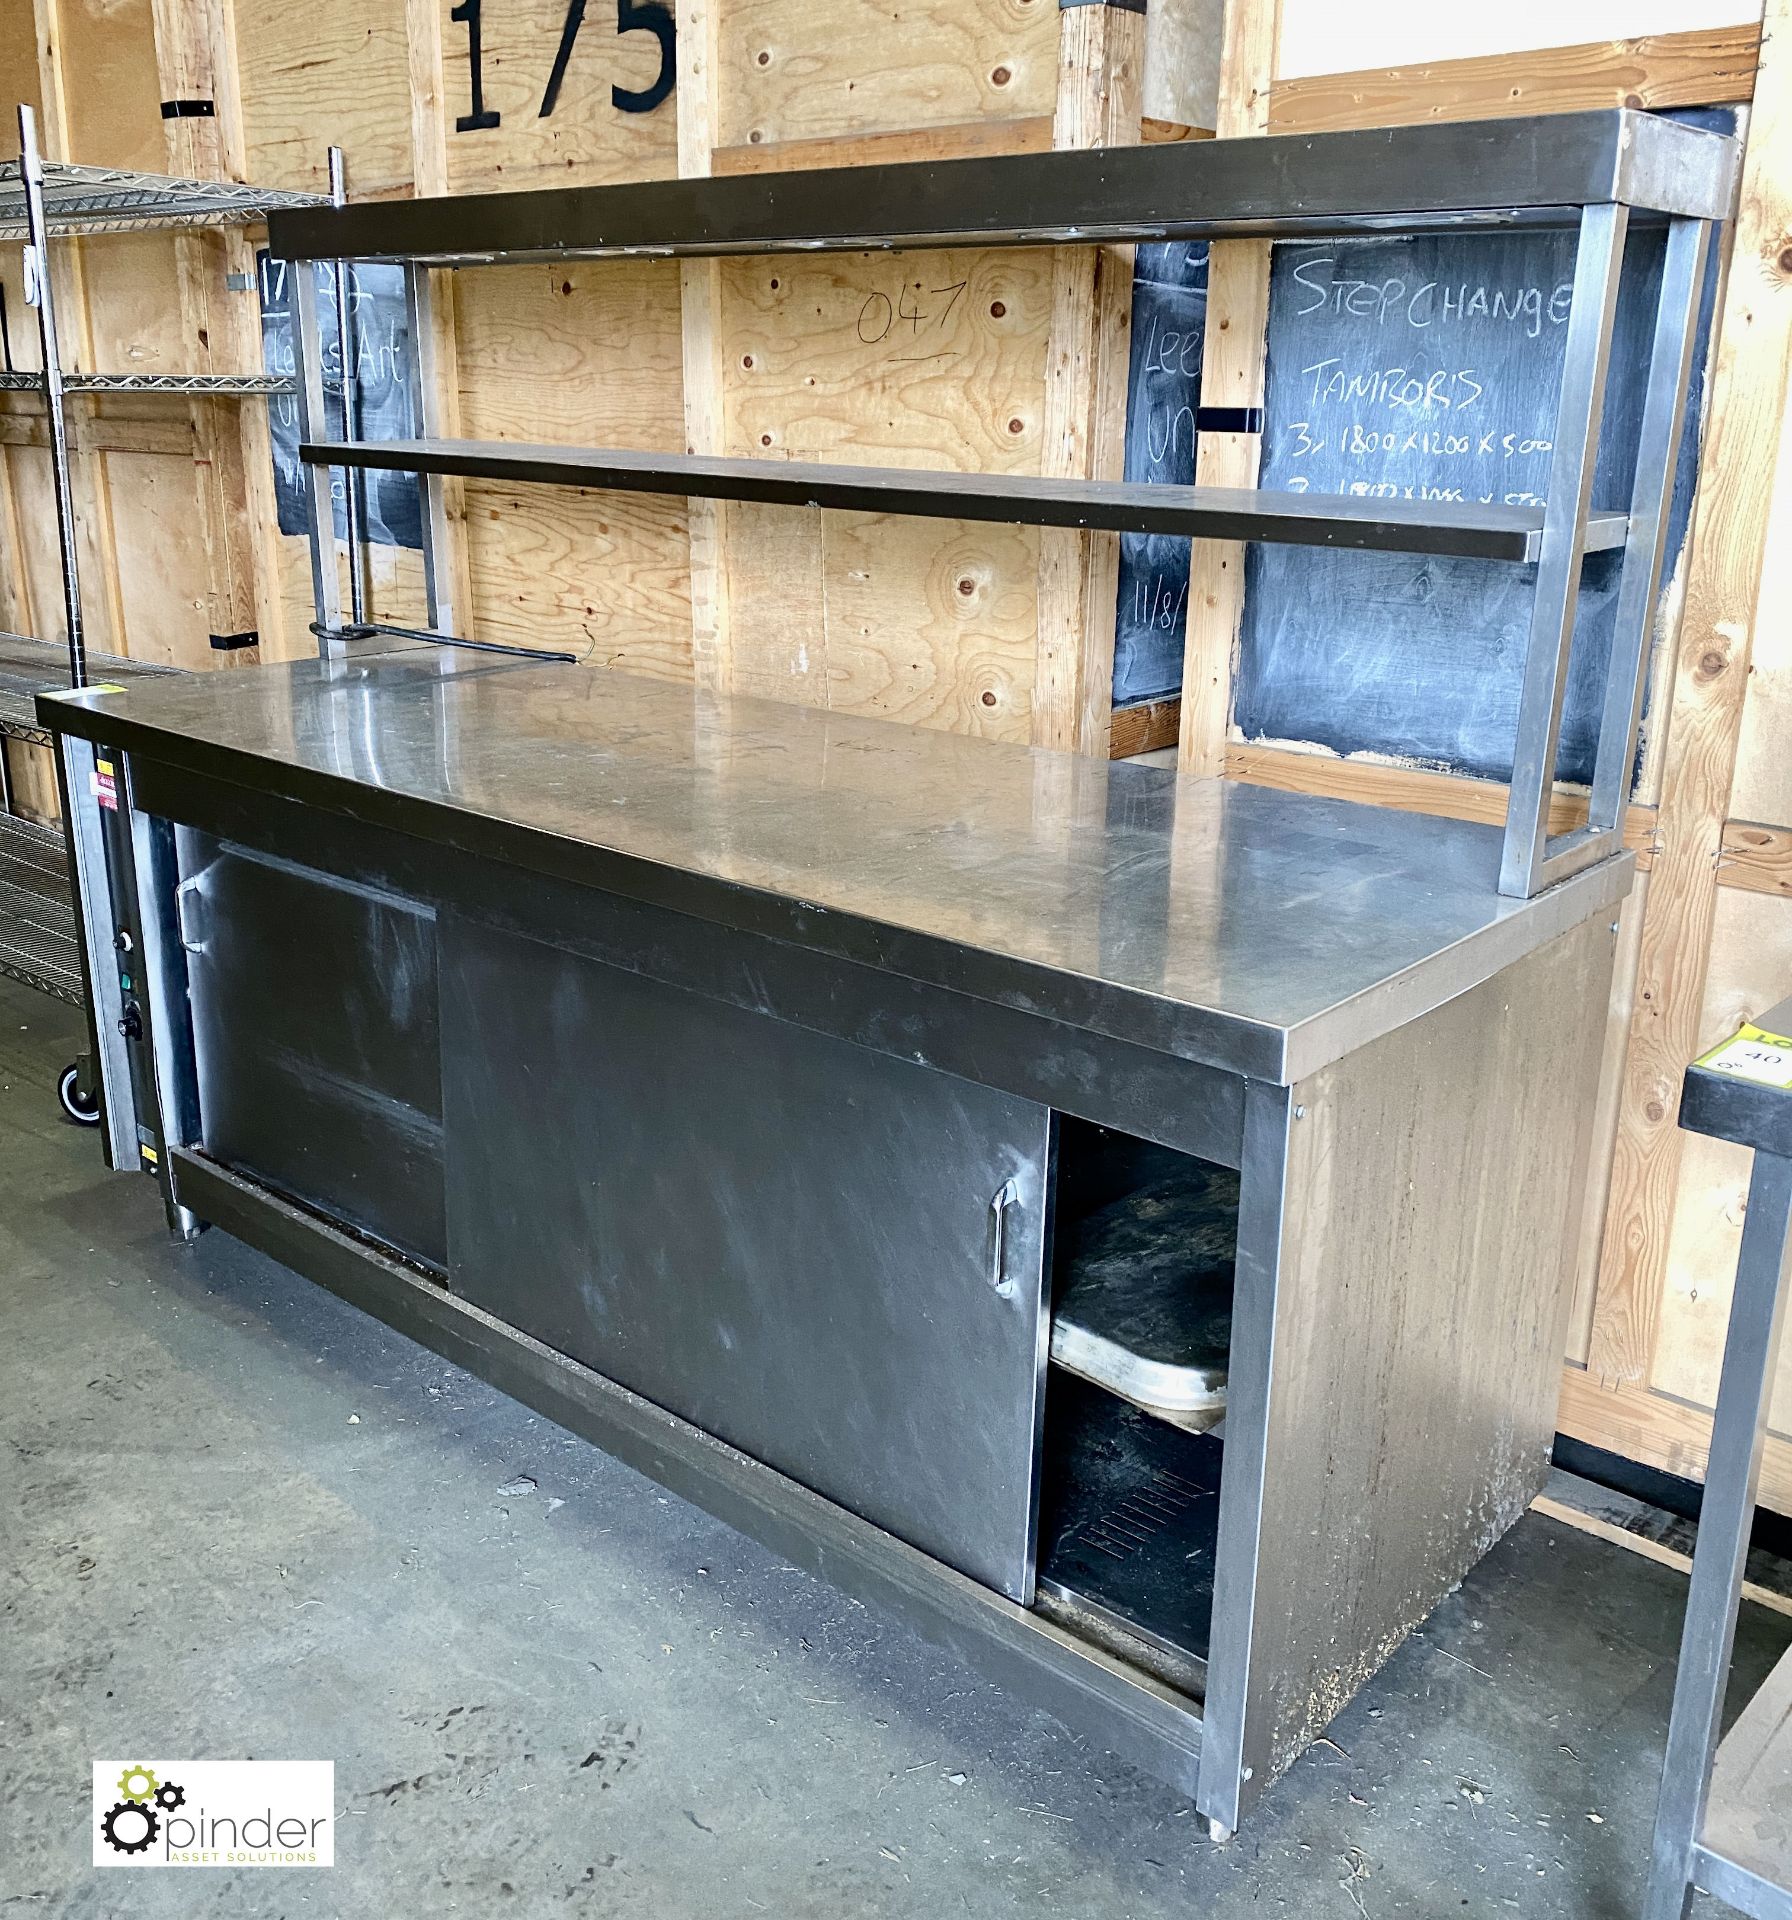 Stainless steel double door heated Servery Cabinet, 2100mm x 750mm x 880mm, 240volts, with pass - Image 2 of 5